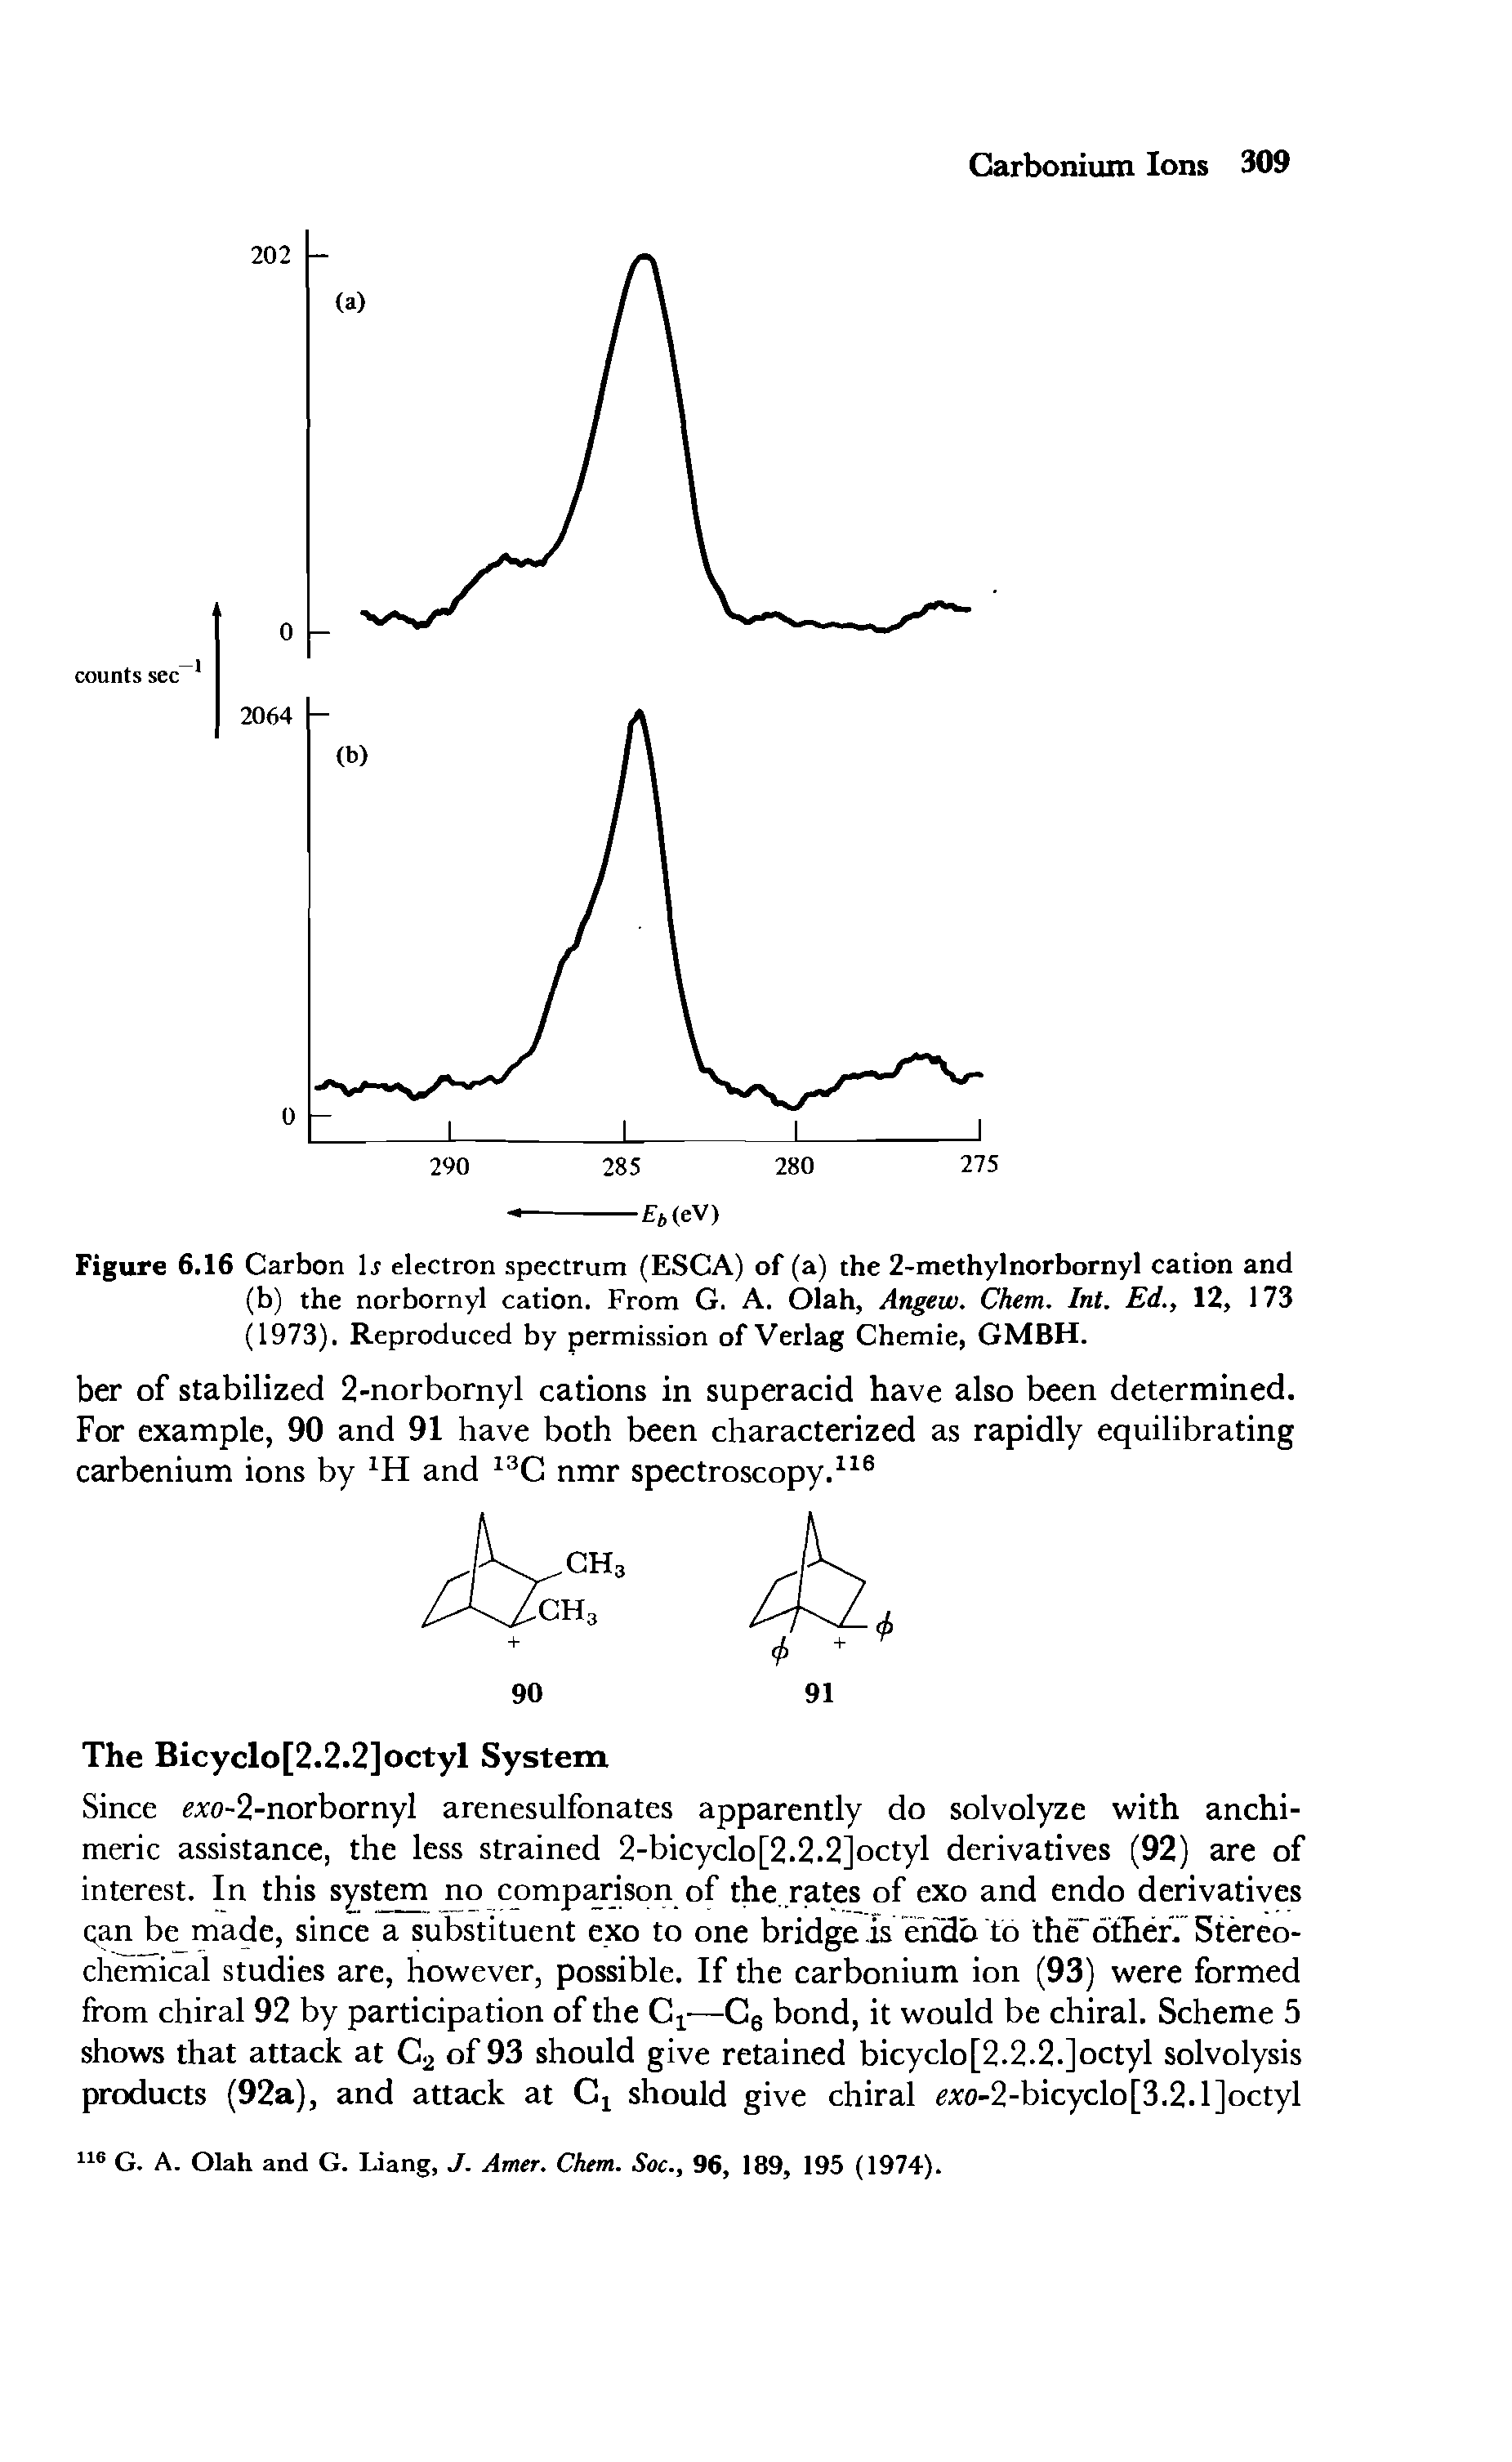 Figure 6.16 Carbon b electron spectrum (ESCA) of (a) the 2-methylnorbornyl cation and (b) the norbornyl cation. From G. A. Olah, Angew. Chem. Int. Ed., 12, 173 (1973). Reproduced by permission of Verlag Chemie, GMBH.